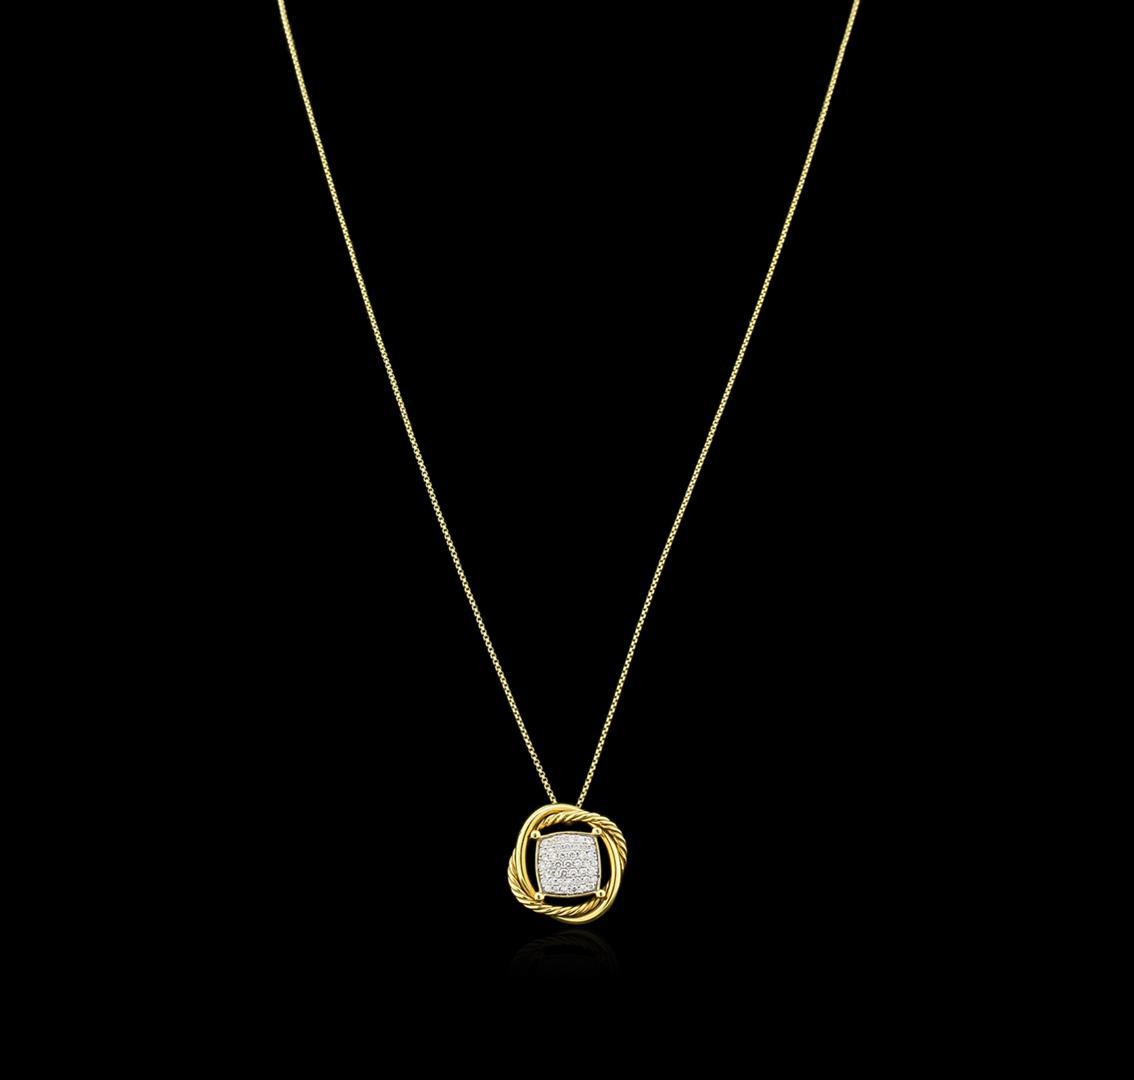 0.46 ctw Diamond Pendant With Chain - 18KT Yellow Gold